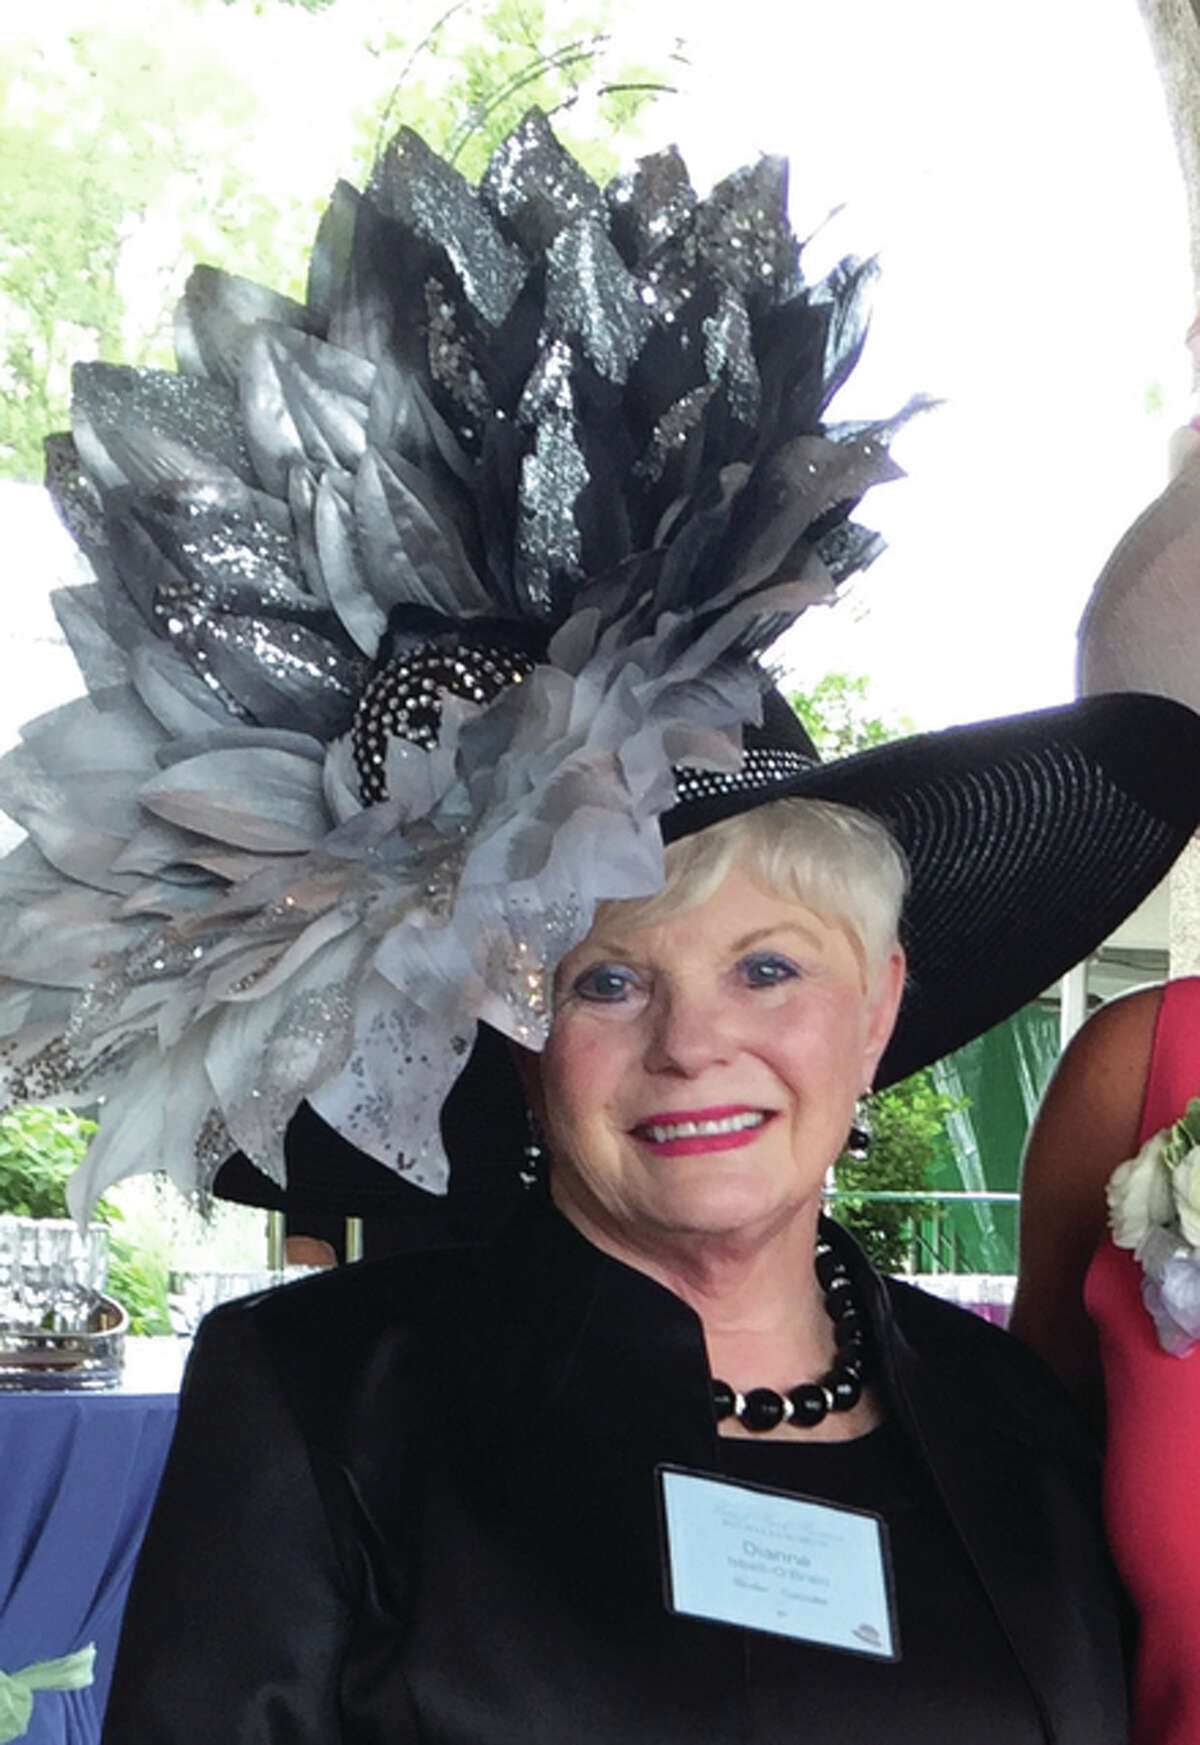 This stunner that Dianne Isbell created and is wearing was the 2015 Forest Park Forever hat winner in the Anniversary category. The Forest Park Forever Hat Luncheon is an annual fundraising event, which more than 1,100 women pay to attend each year. From 16 to 20 hat winners are selected each year from all of these women. Isbell has won six consecutive years and five of her customers have been winners (one each year for five years). 3) These are the photos sent to me for being a winner in New York’s Fall Fashion Week — my picture wearing my winning fascinator was on the Jumbo Tron in Times Square the final day of Fashion Week. 4) 5) 6) my winning “Black Lace Twirl” headband fascinator at Forest Park Forever Hat Luncheon 7) My winning “Poppy Hat” for Forest Park Forever